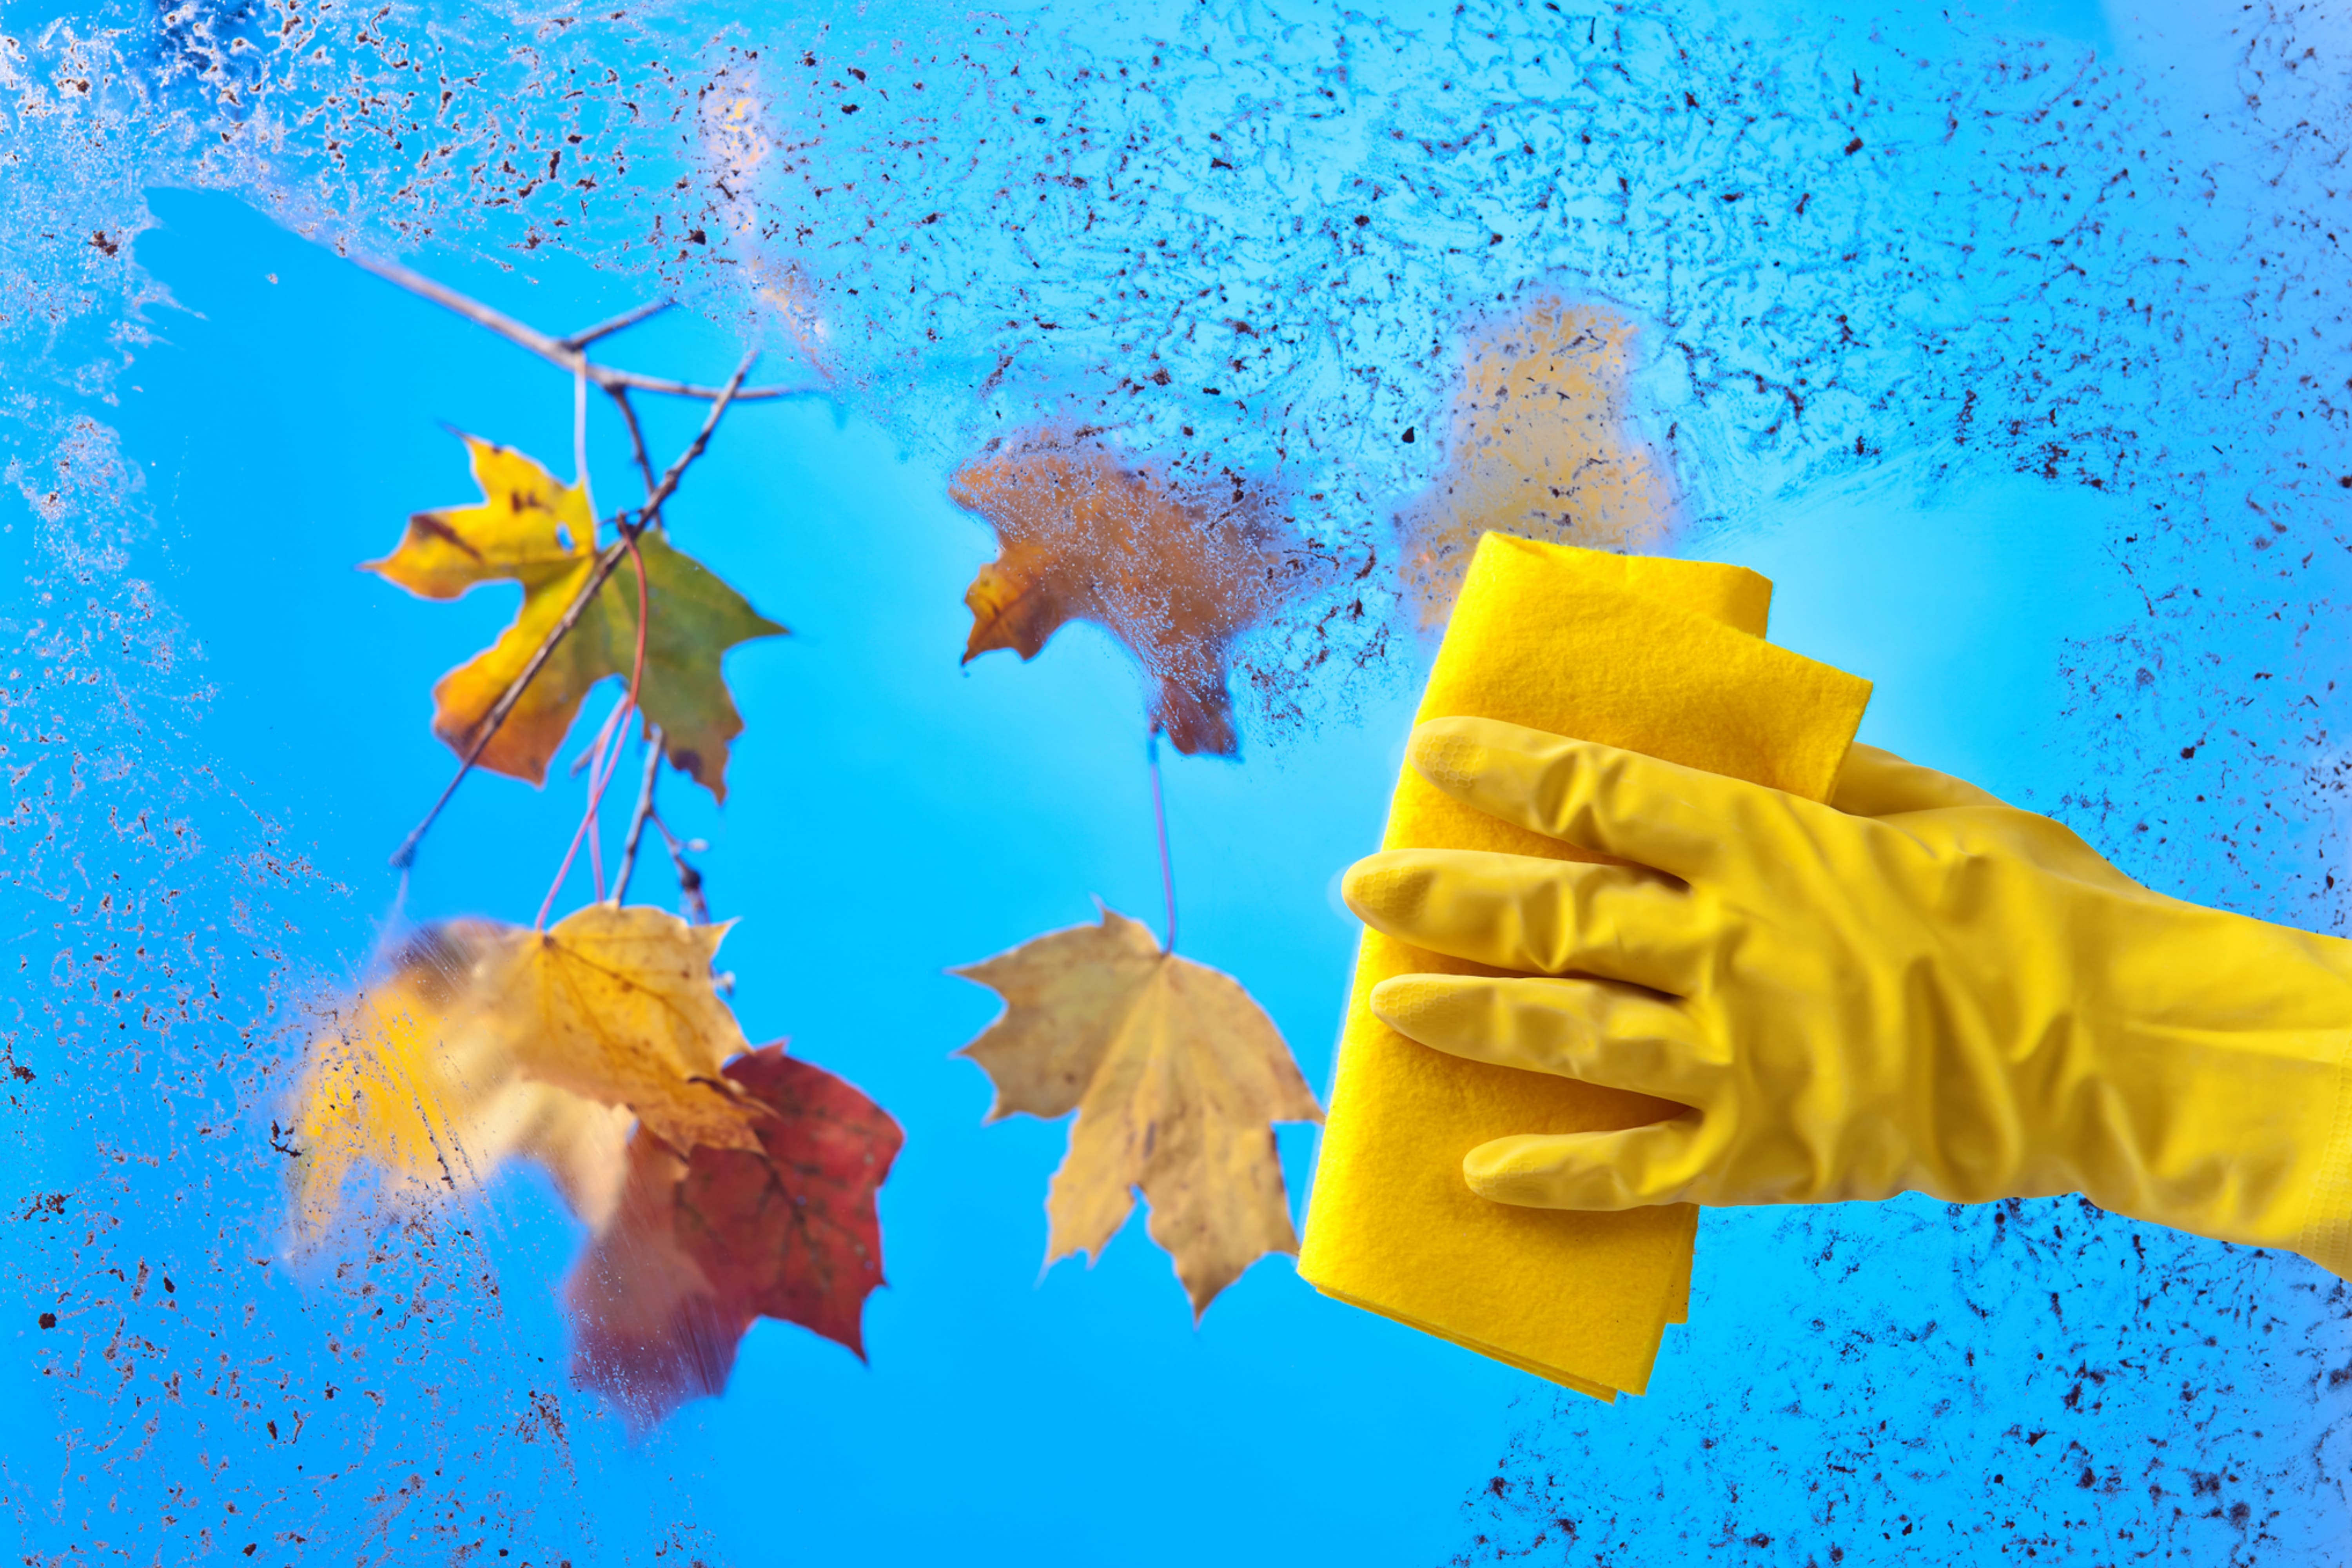 Fall Cleaning Checklist Preparing Your Home for the Cooler Months